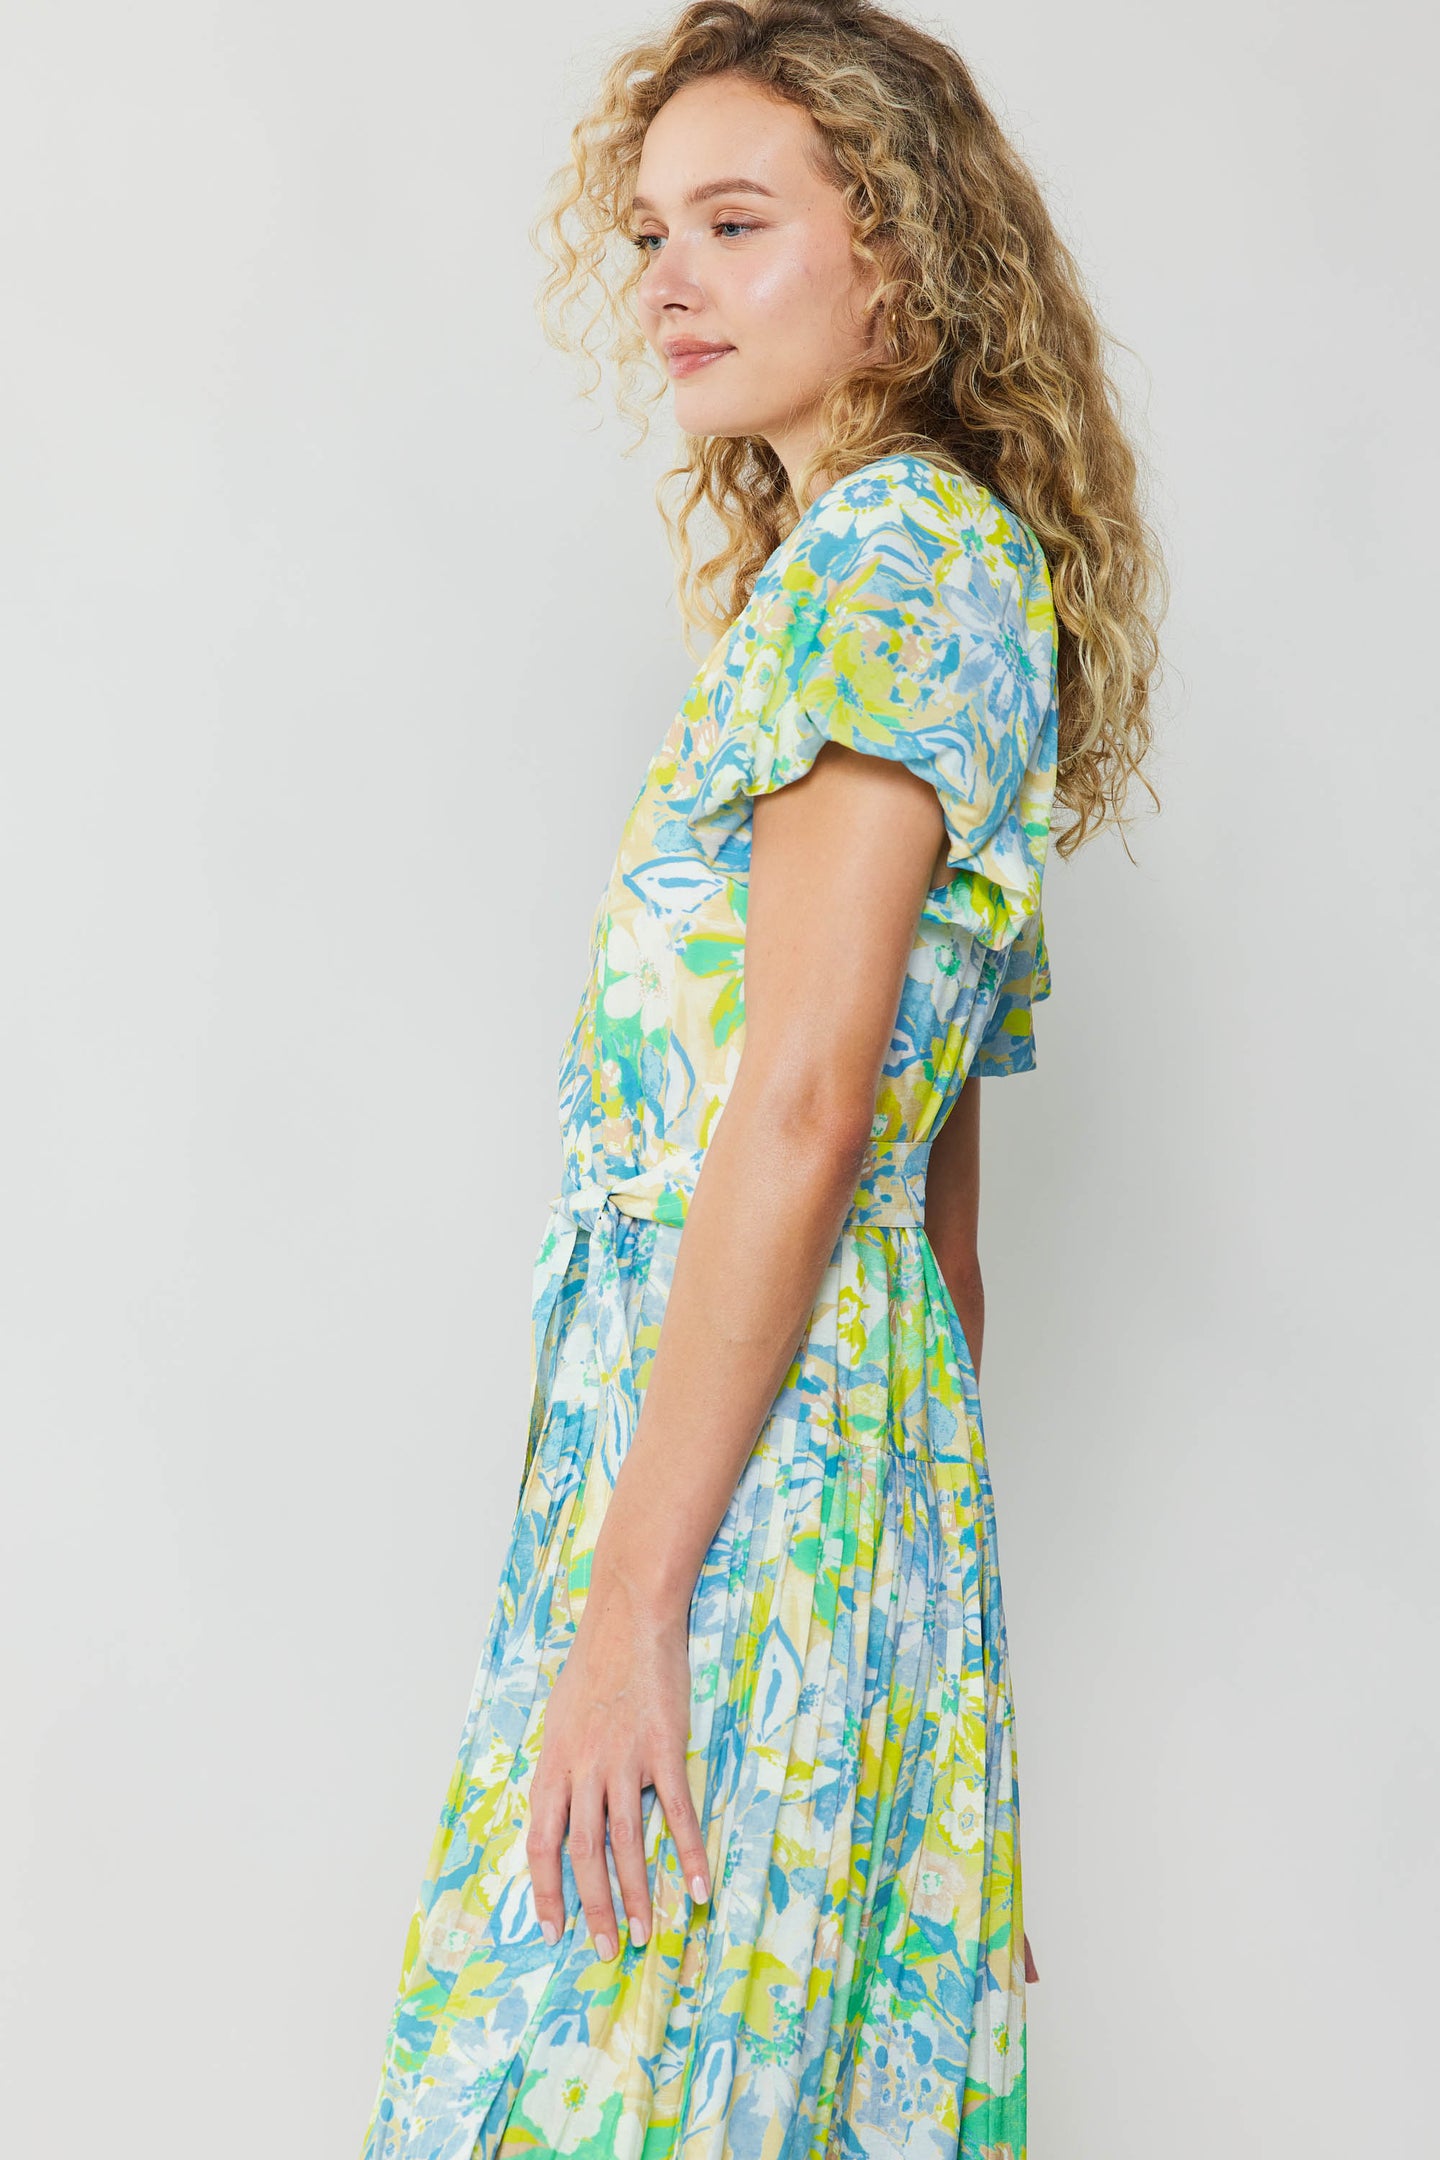 Women's Printed Dresses, Abstract & Floral Dresses